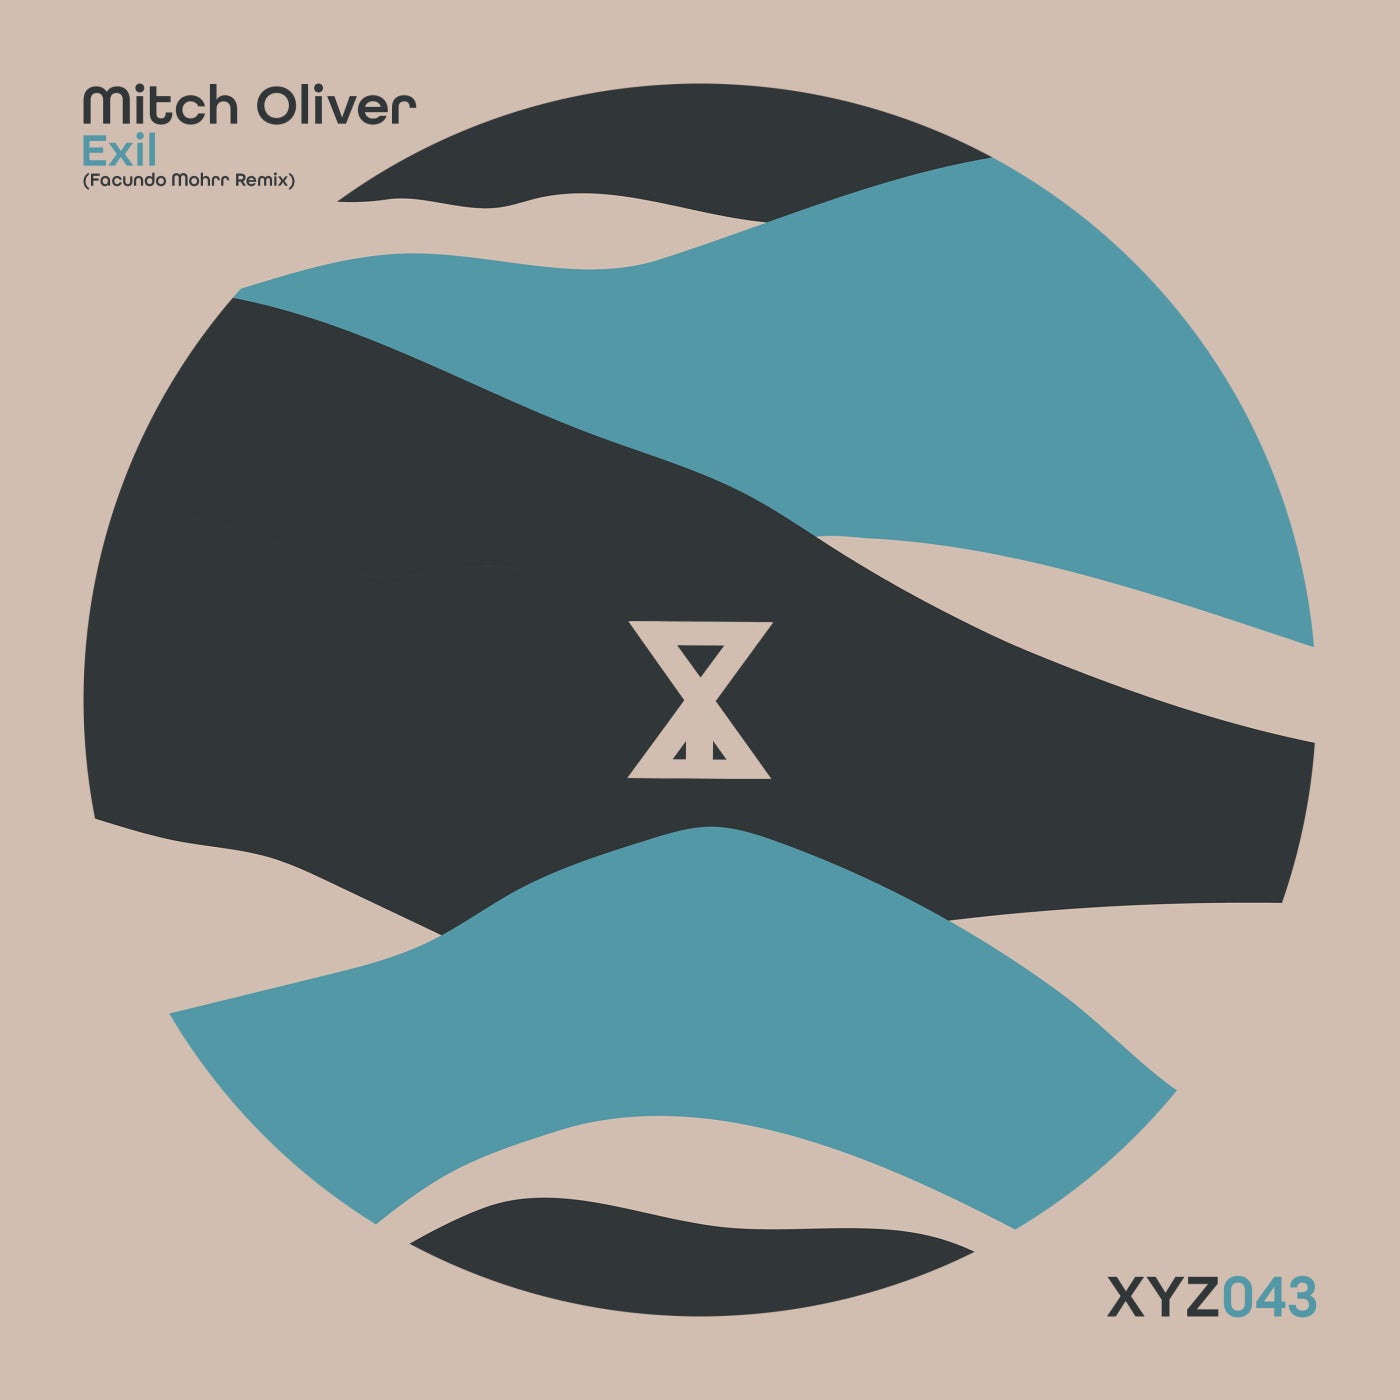 Mitch Oliver – Exil (Facundo Mohrr’s Sunday in Brooklyn Remix) [XYZ043]